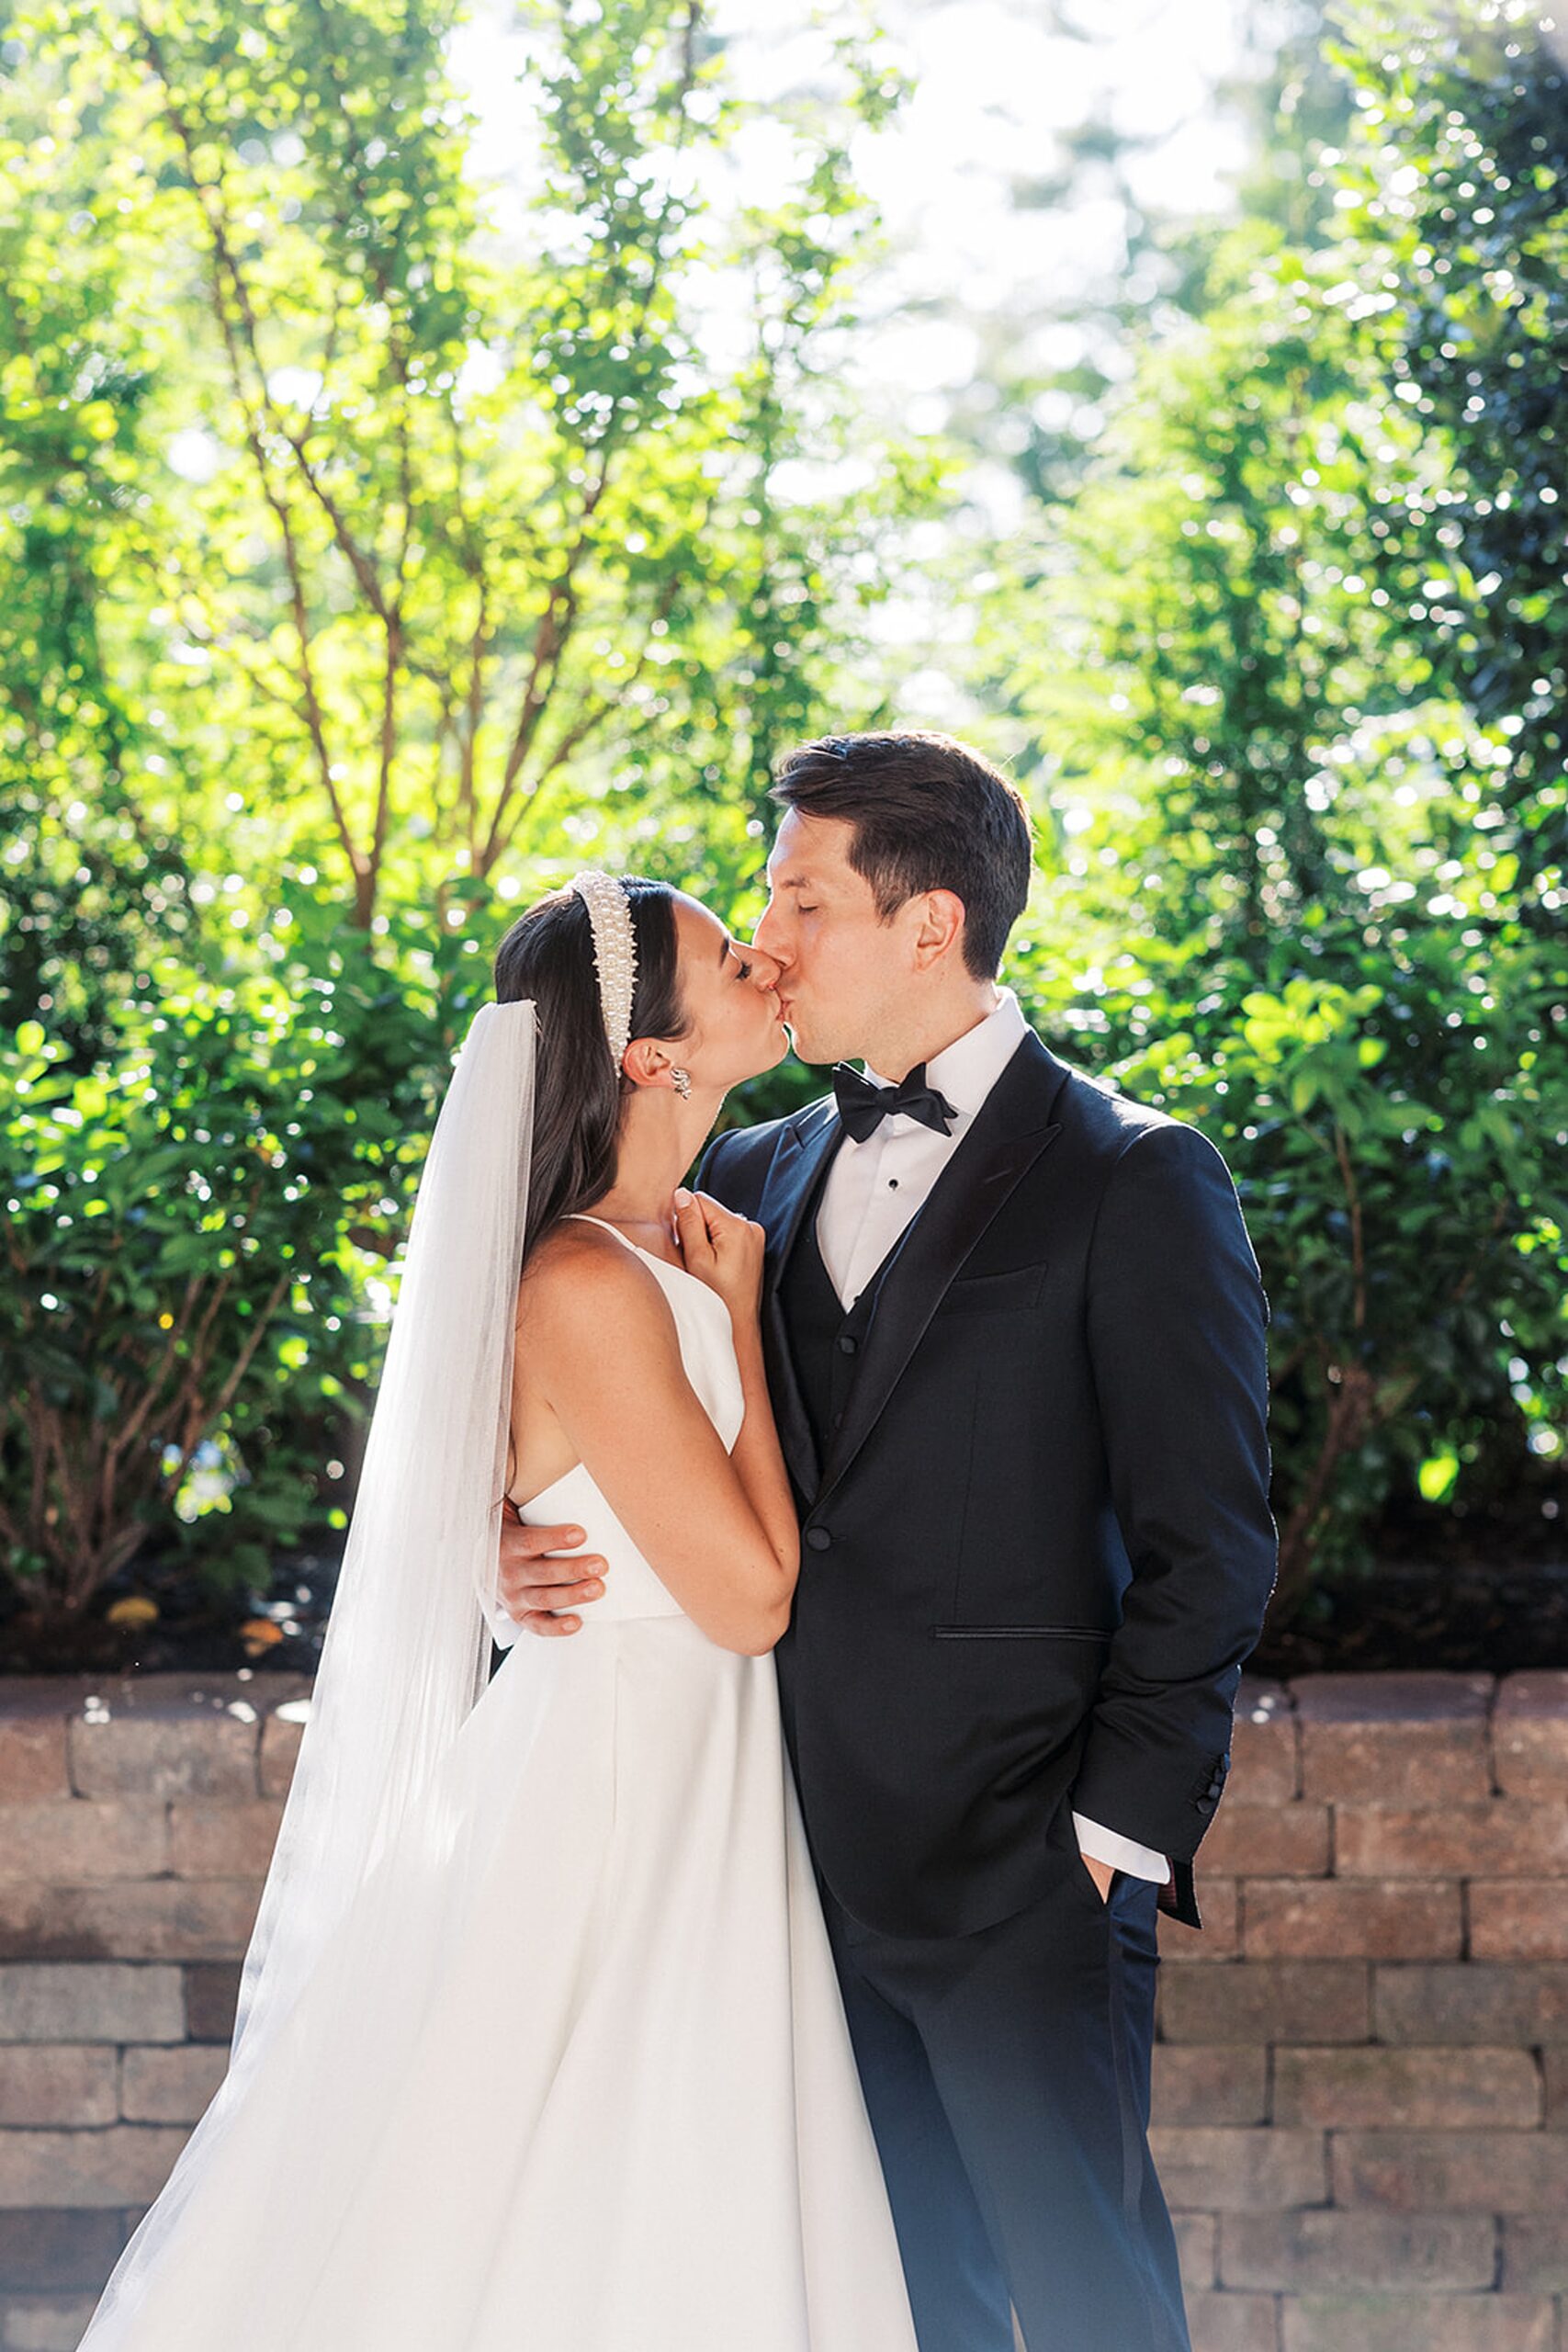 Newlyweds kiss in the gardens by a stone wall at the Stonehouse At Stirling Ridge Wedding venue